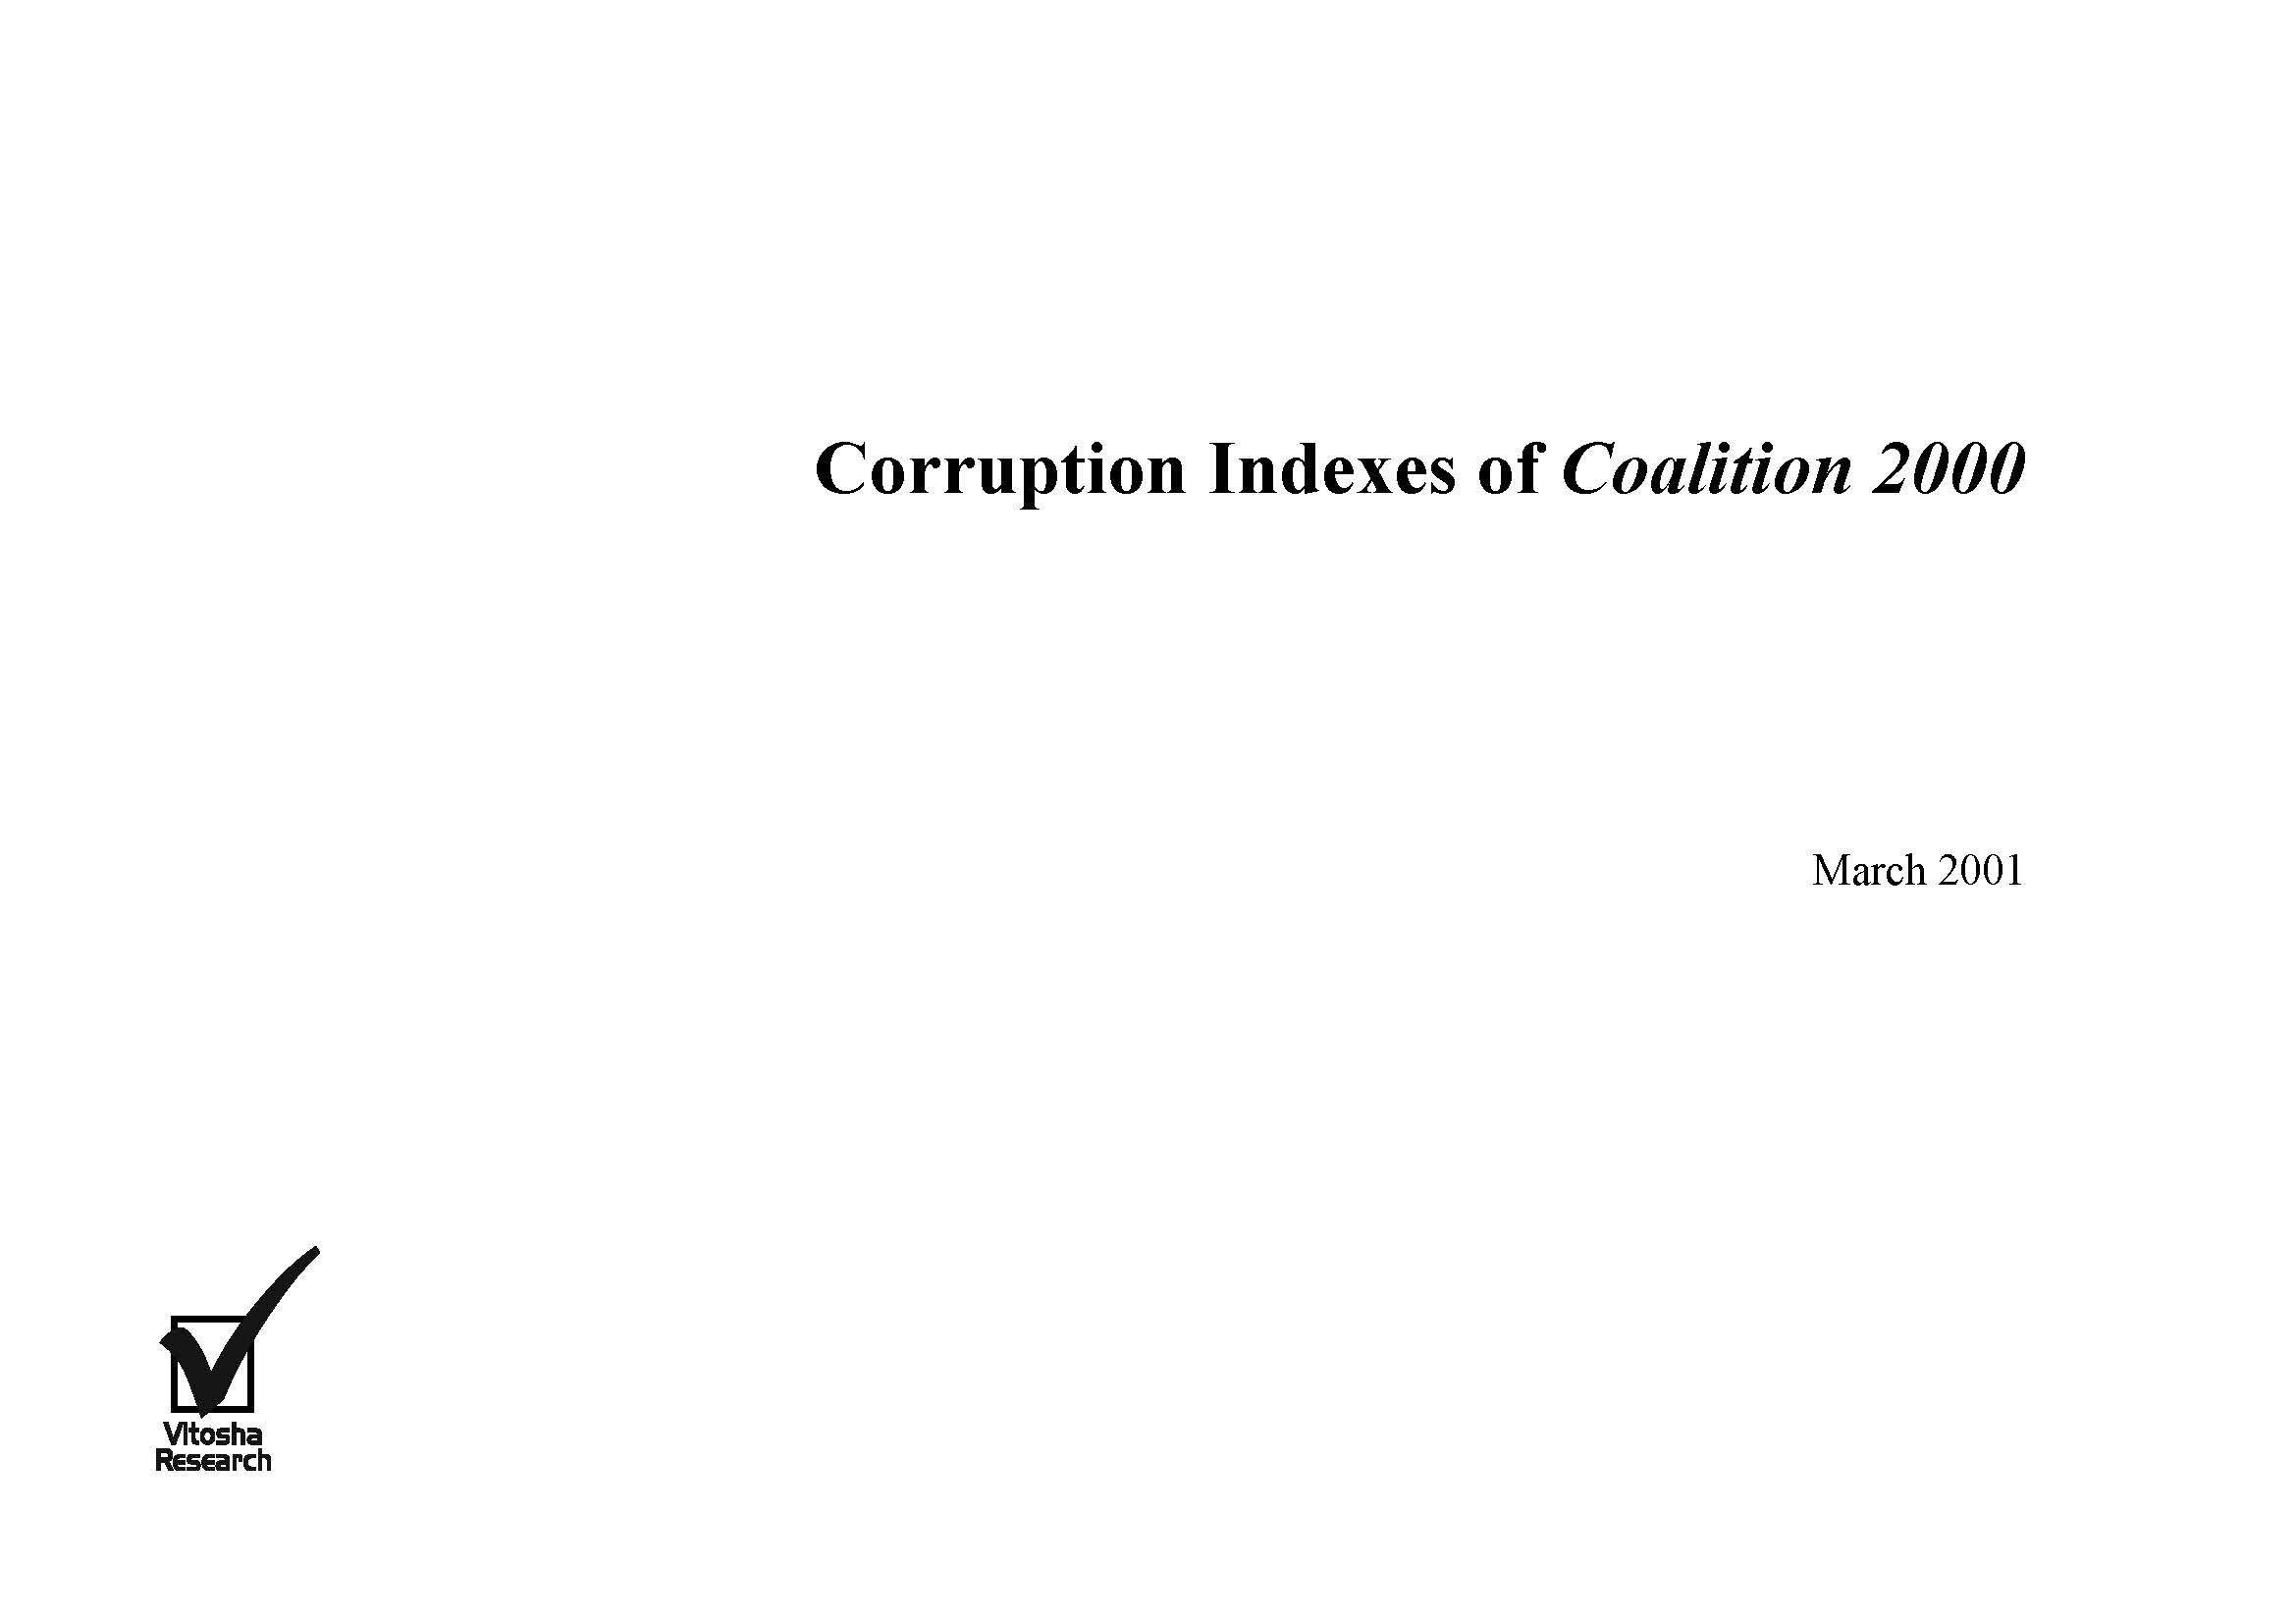 Corruption Indexes of Coalition 2000, March 2001